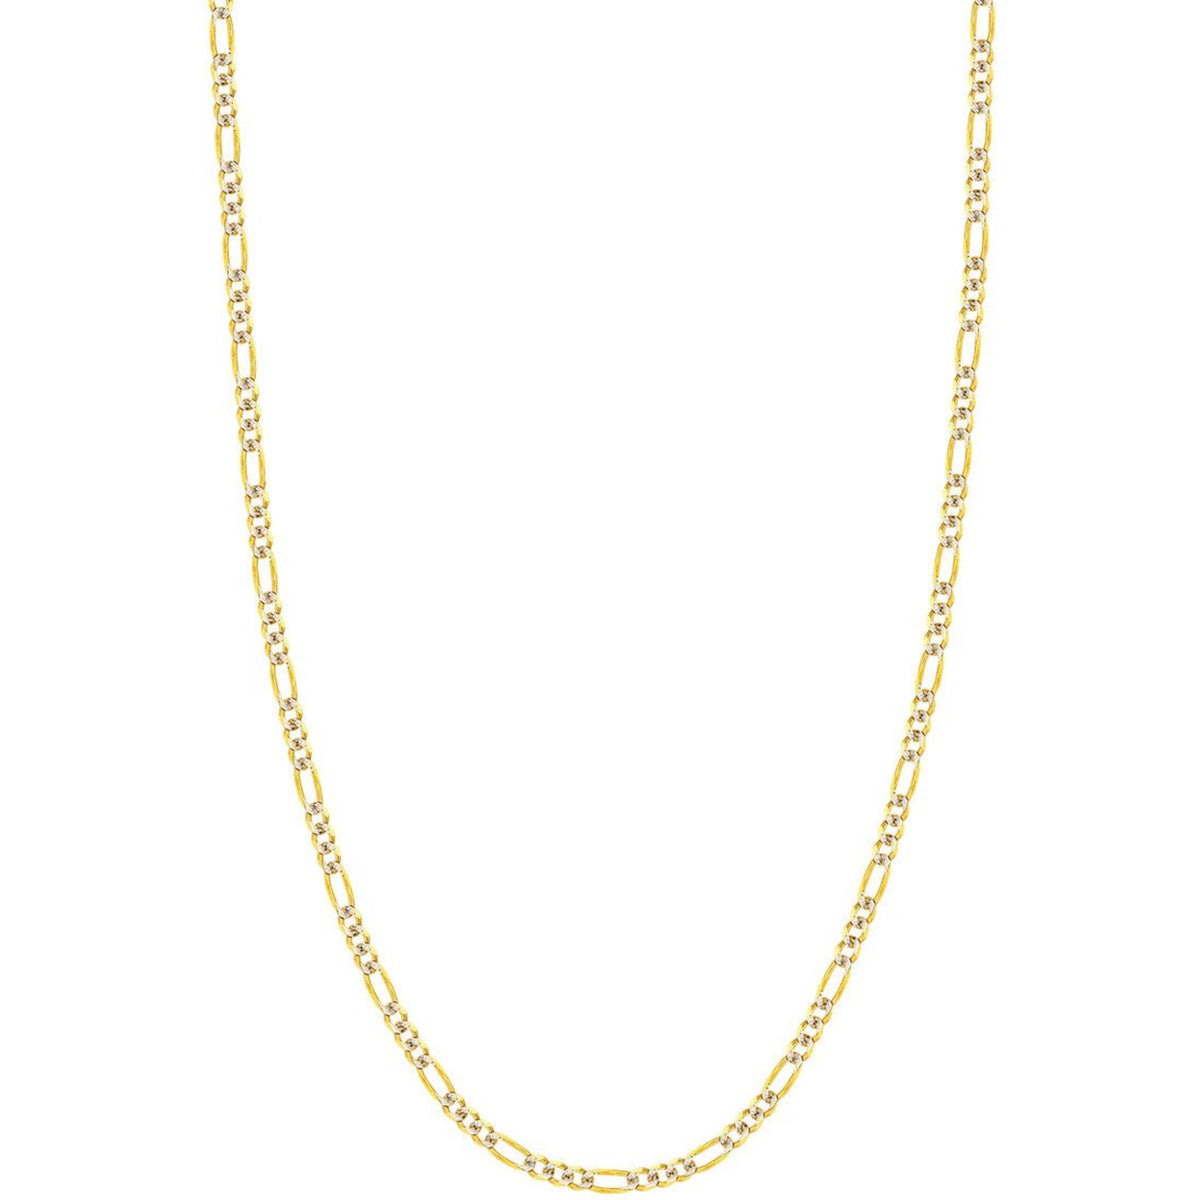 Olas d'Oro 18" Necklace - 14K Yellow/White Gold 3.2mm Two-Tone Pave Figaro Chain with Lobster Lock